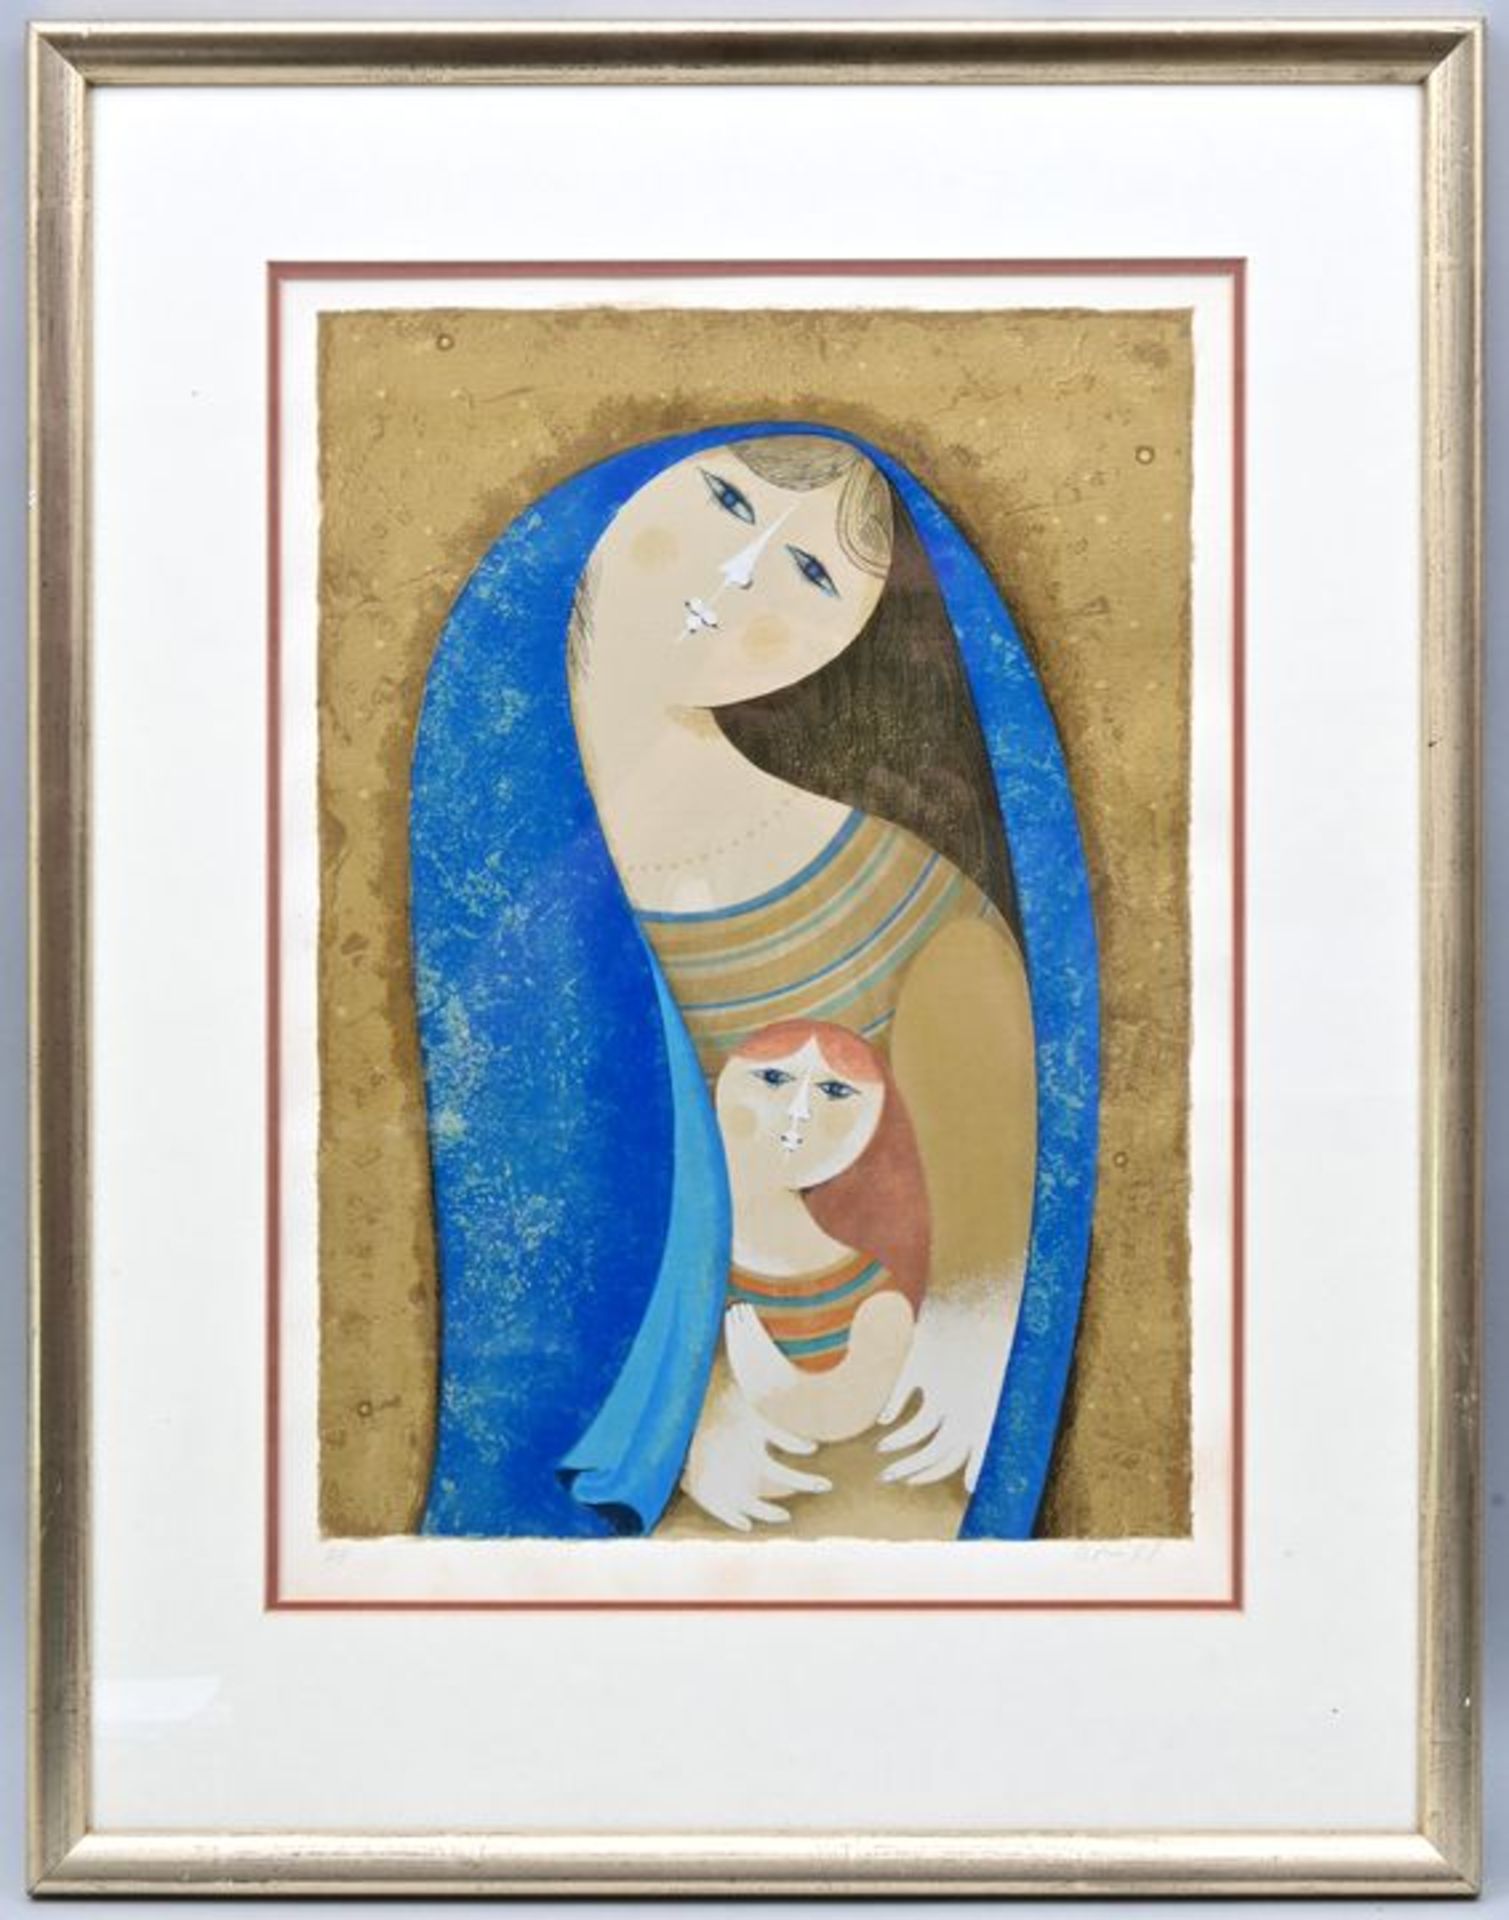 Briss Sami Mutter mit Kind / mother with child, colour lithograph - Image 4 of 5